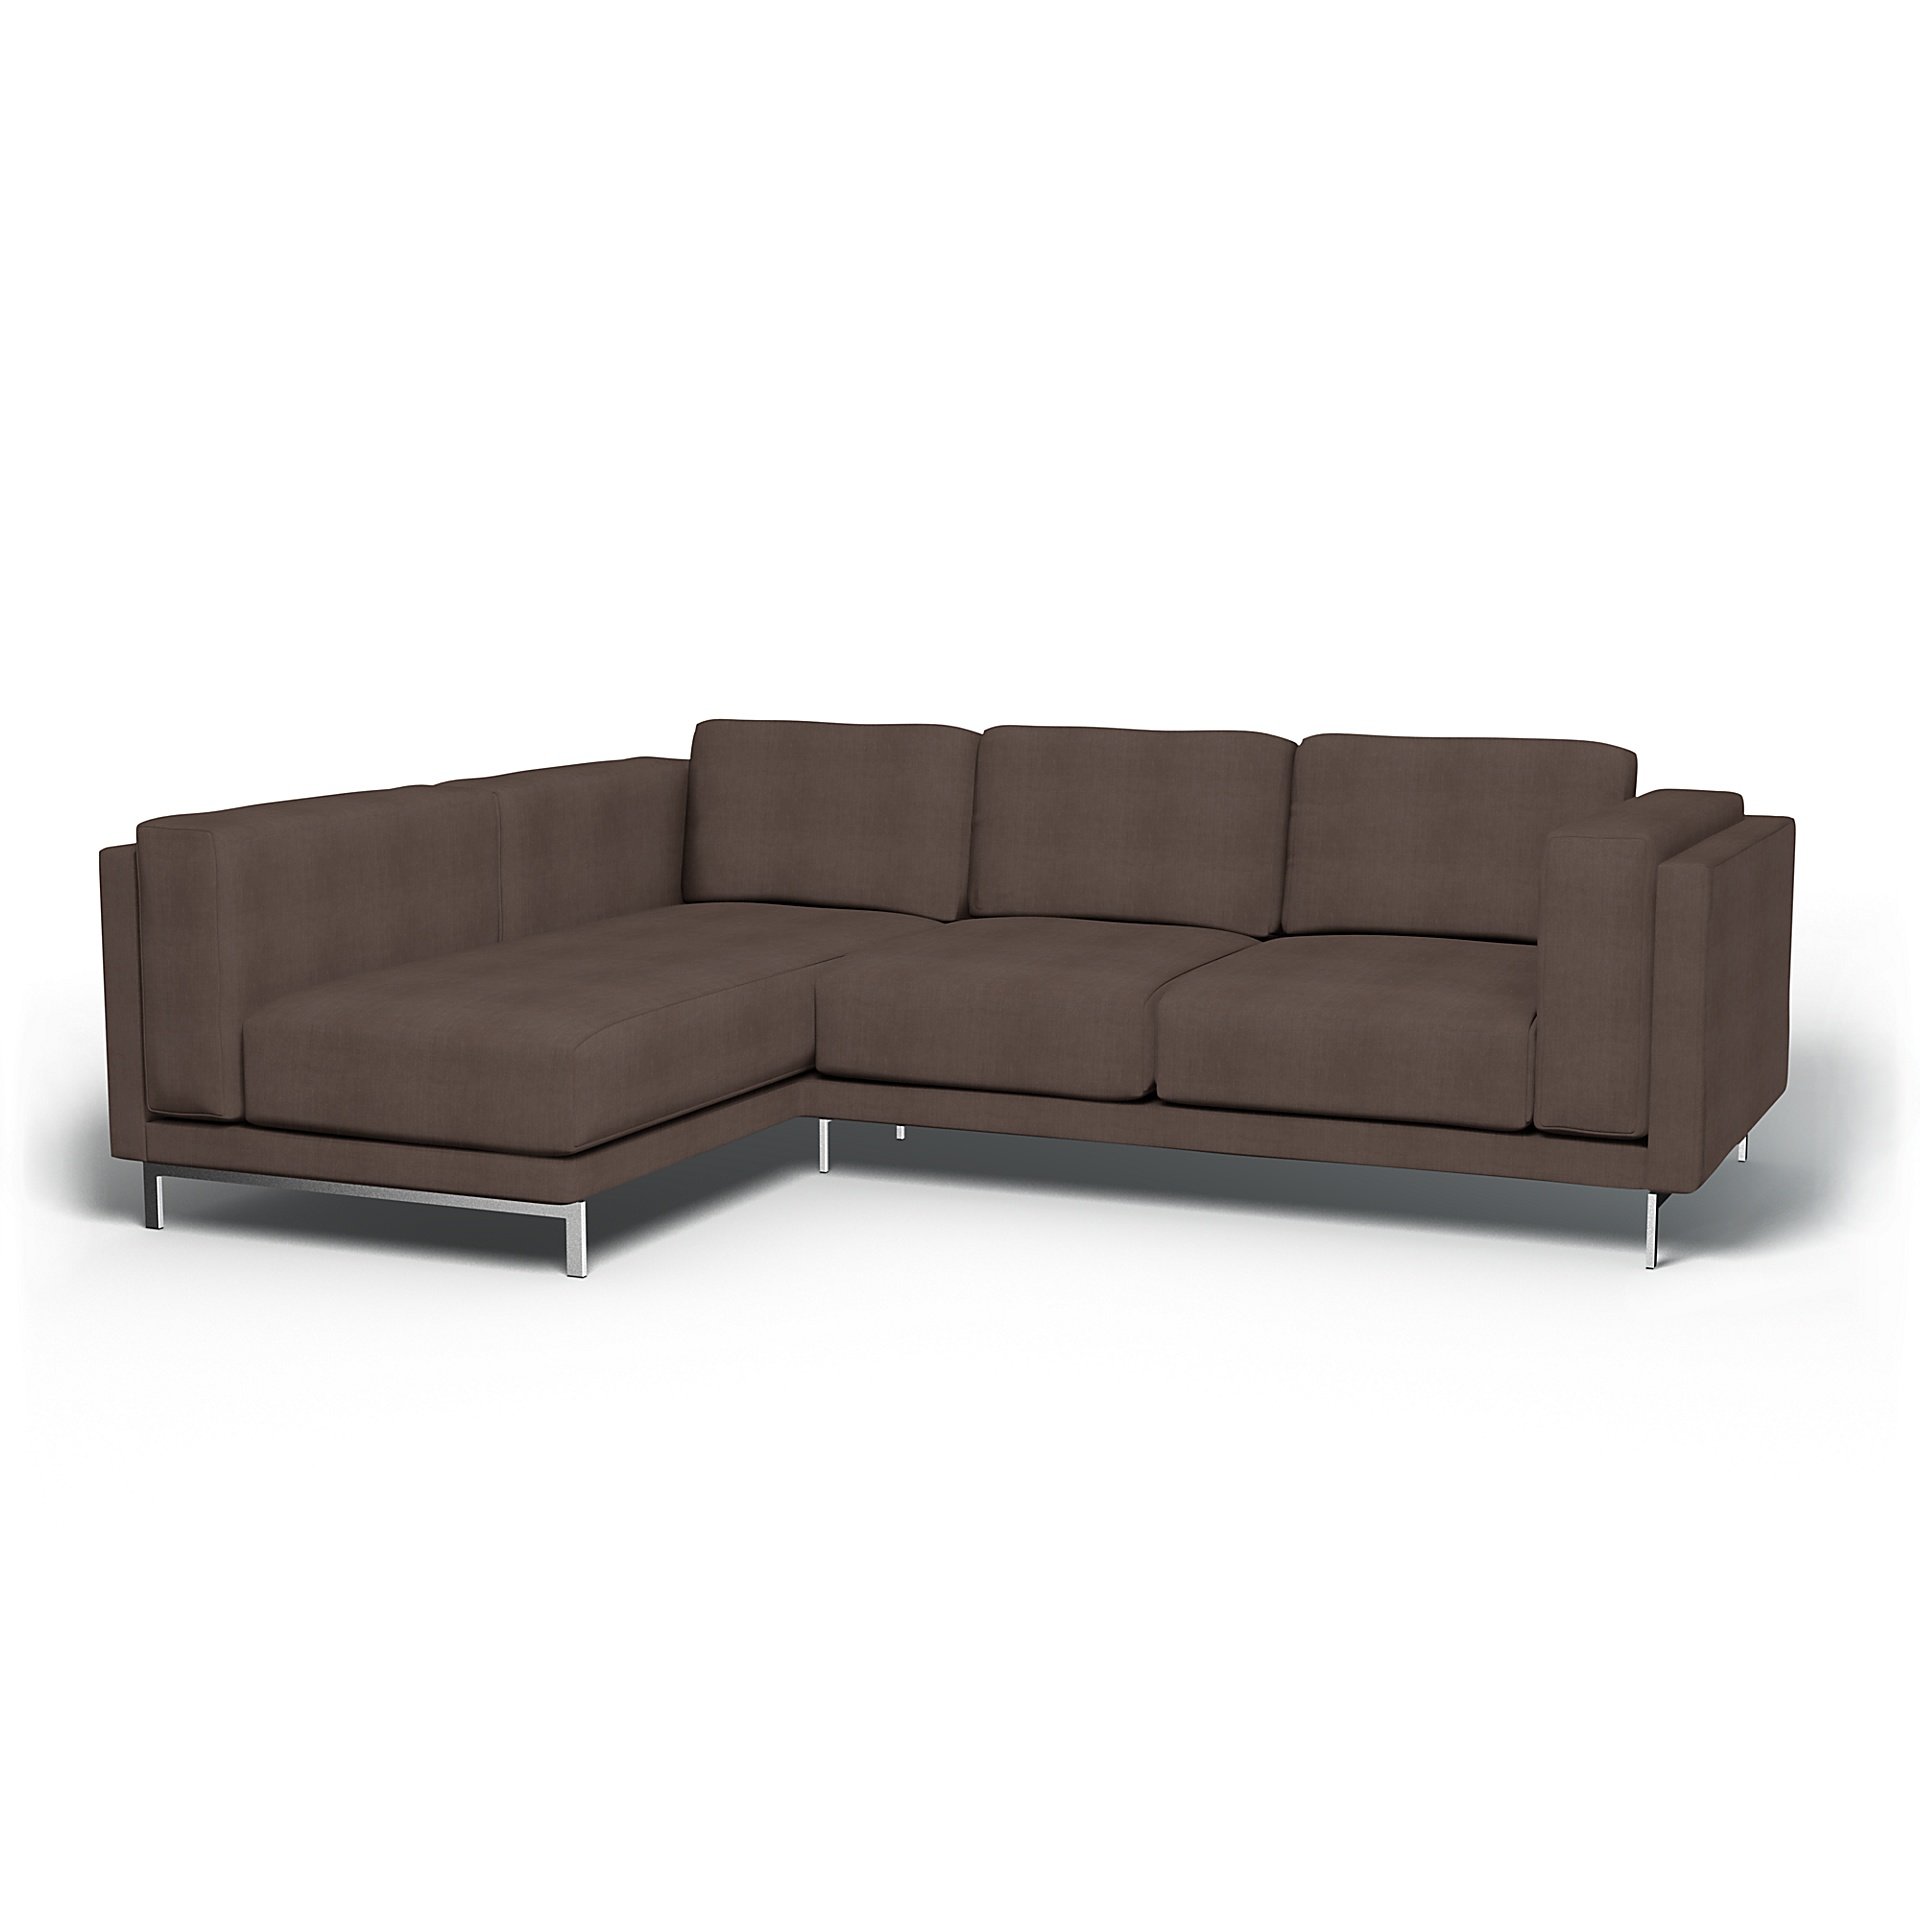 IKEA - Nockeby 3 Seater Sofa with Left Chaise Cover, Cocoa, Linen - Bemz